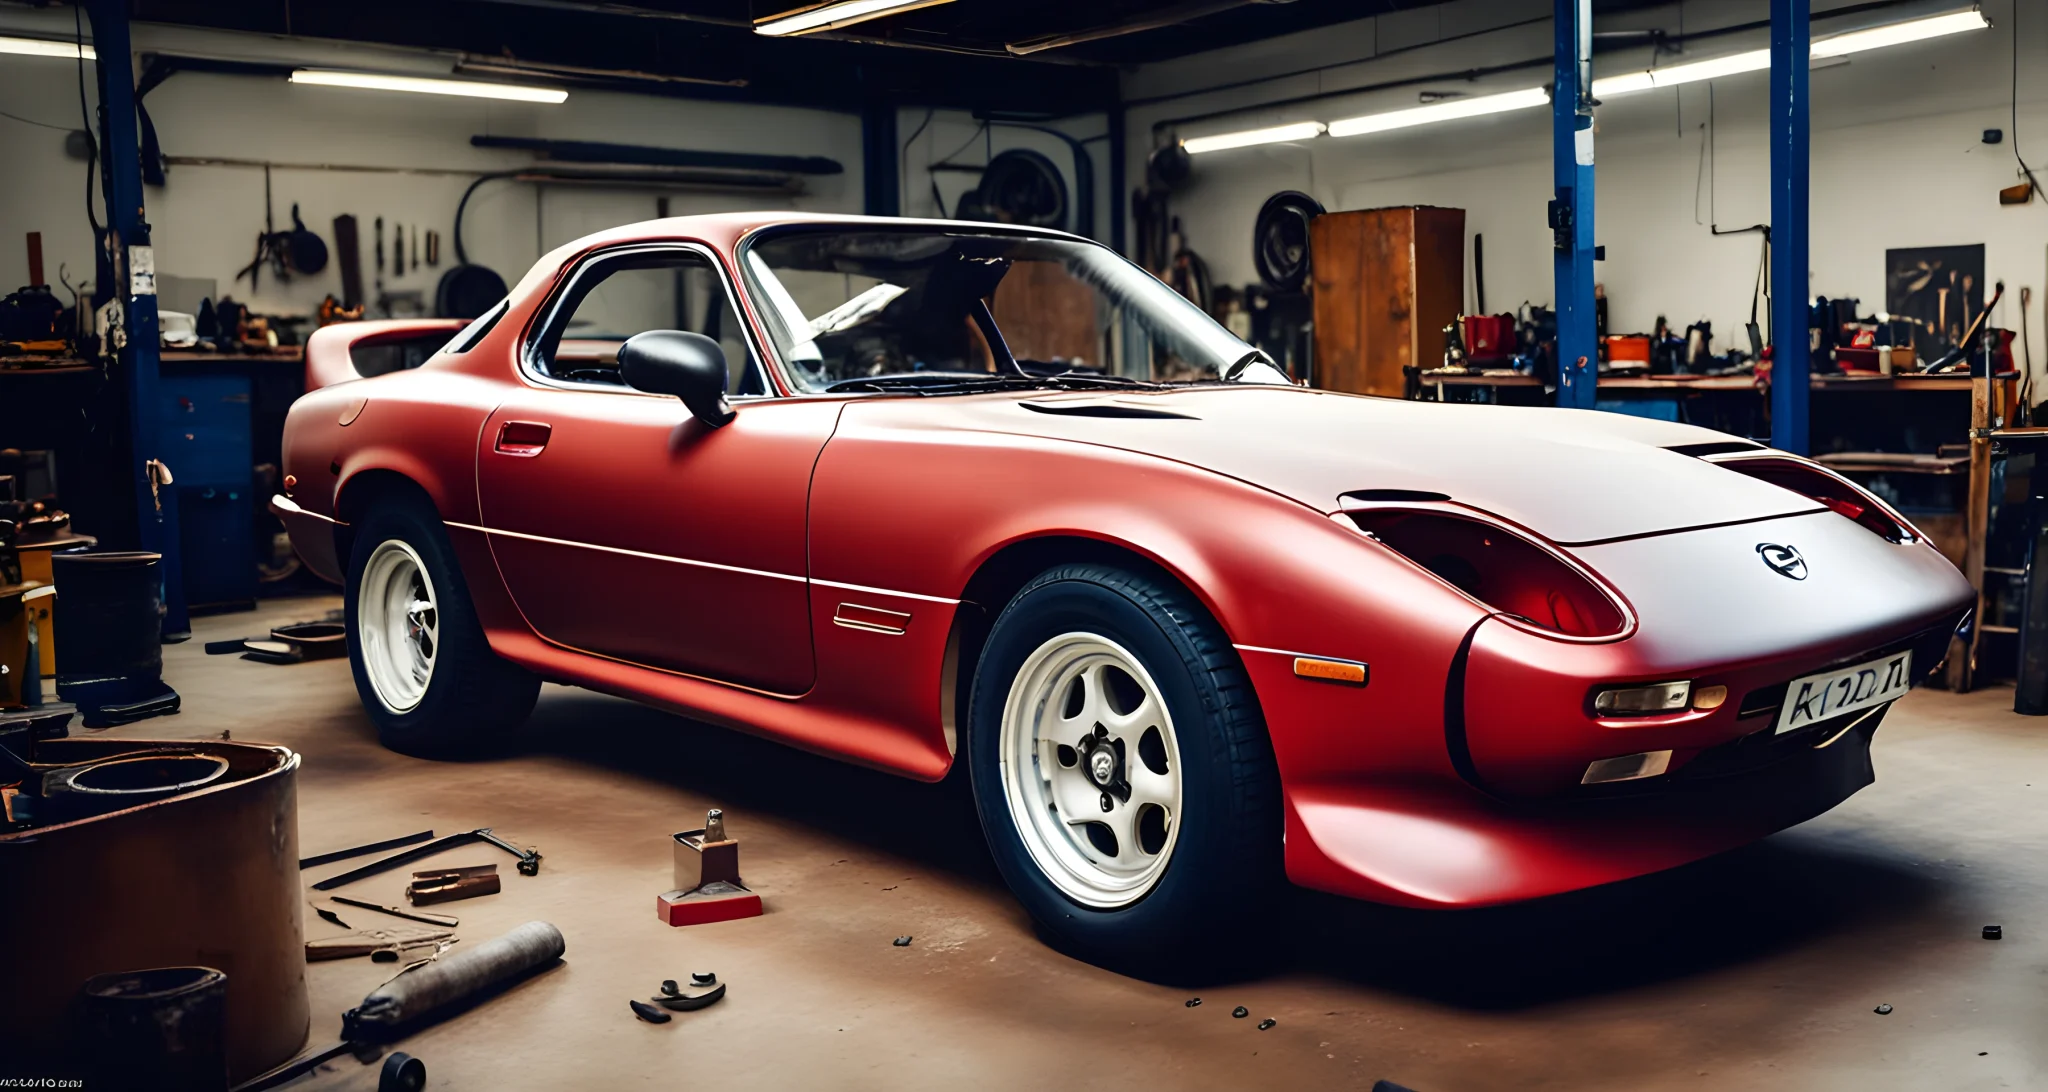 The image shows a vintage Mazda RX-7 sports car being carefully restored in a workshop.